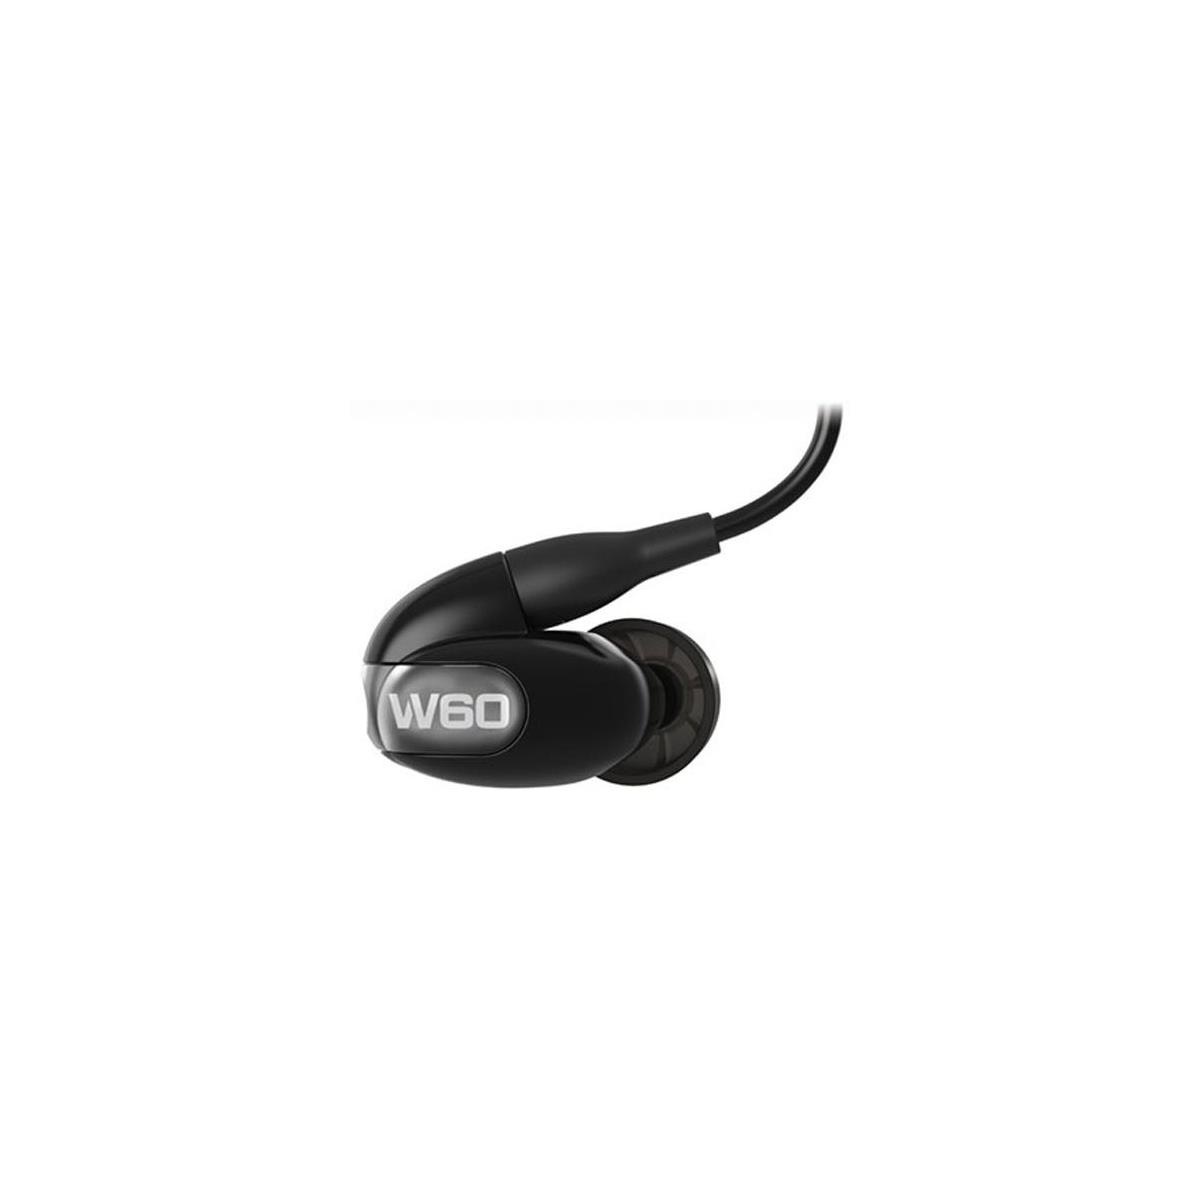 Image of Westone W60 Six-Driver True-Fit Earphones with MMCX Audio and Bluetooth Cables